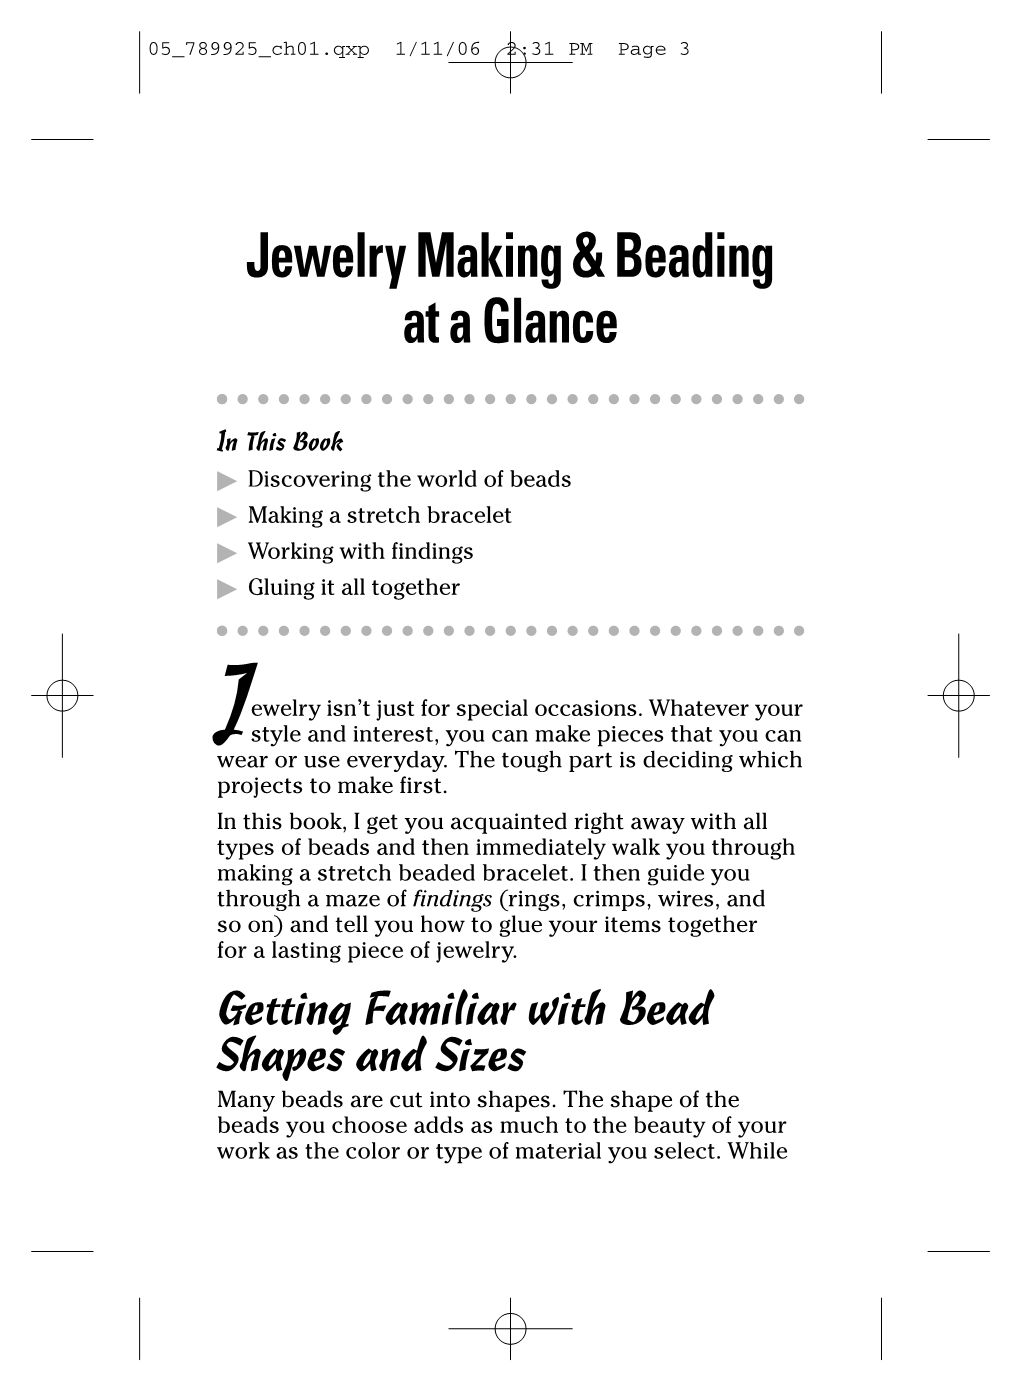 Jewelry Making & Beading at a Glance